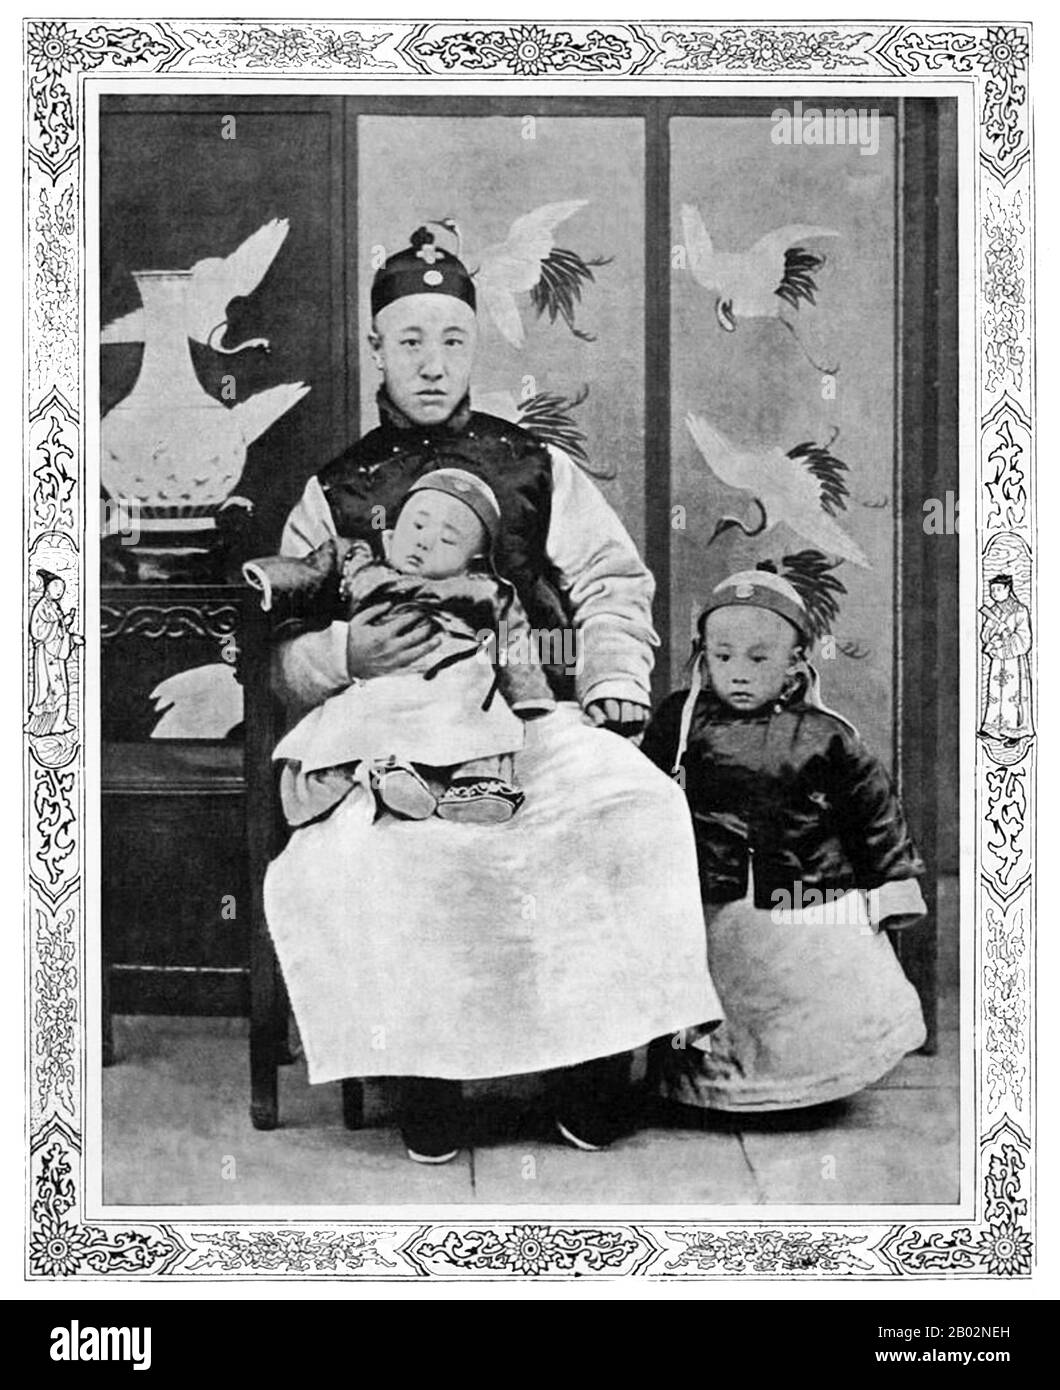 Aisin-Gioro Pu Yi (7 February 1906 – 17 October 1967), of the Manchu Aisin Gioro ruling family, was the last Emperor of China.  He ruled in two periods between 1908 and 1917, firstly as the Xuantong Emperor from 1908 to 1912, and nominally as a non-ruling puppet emperor for twelve days in 1917. He was the twelfth and final member of the Qing Dynasty to rule over China proper. Stock Photo